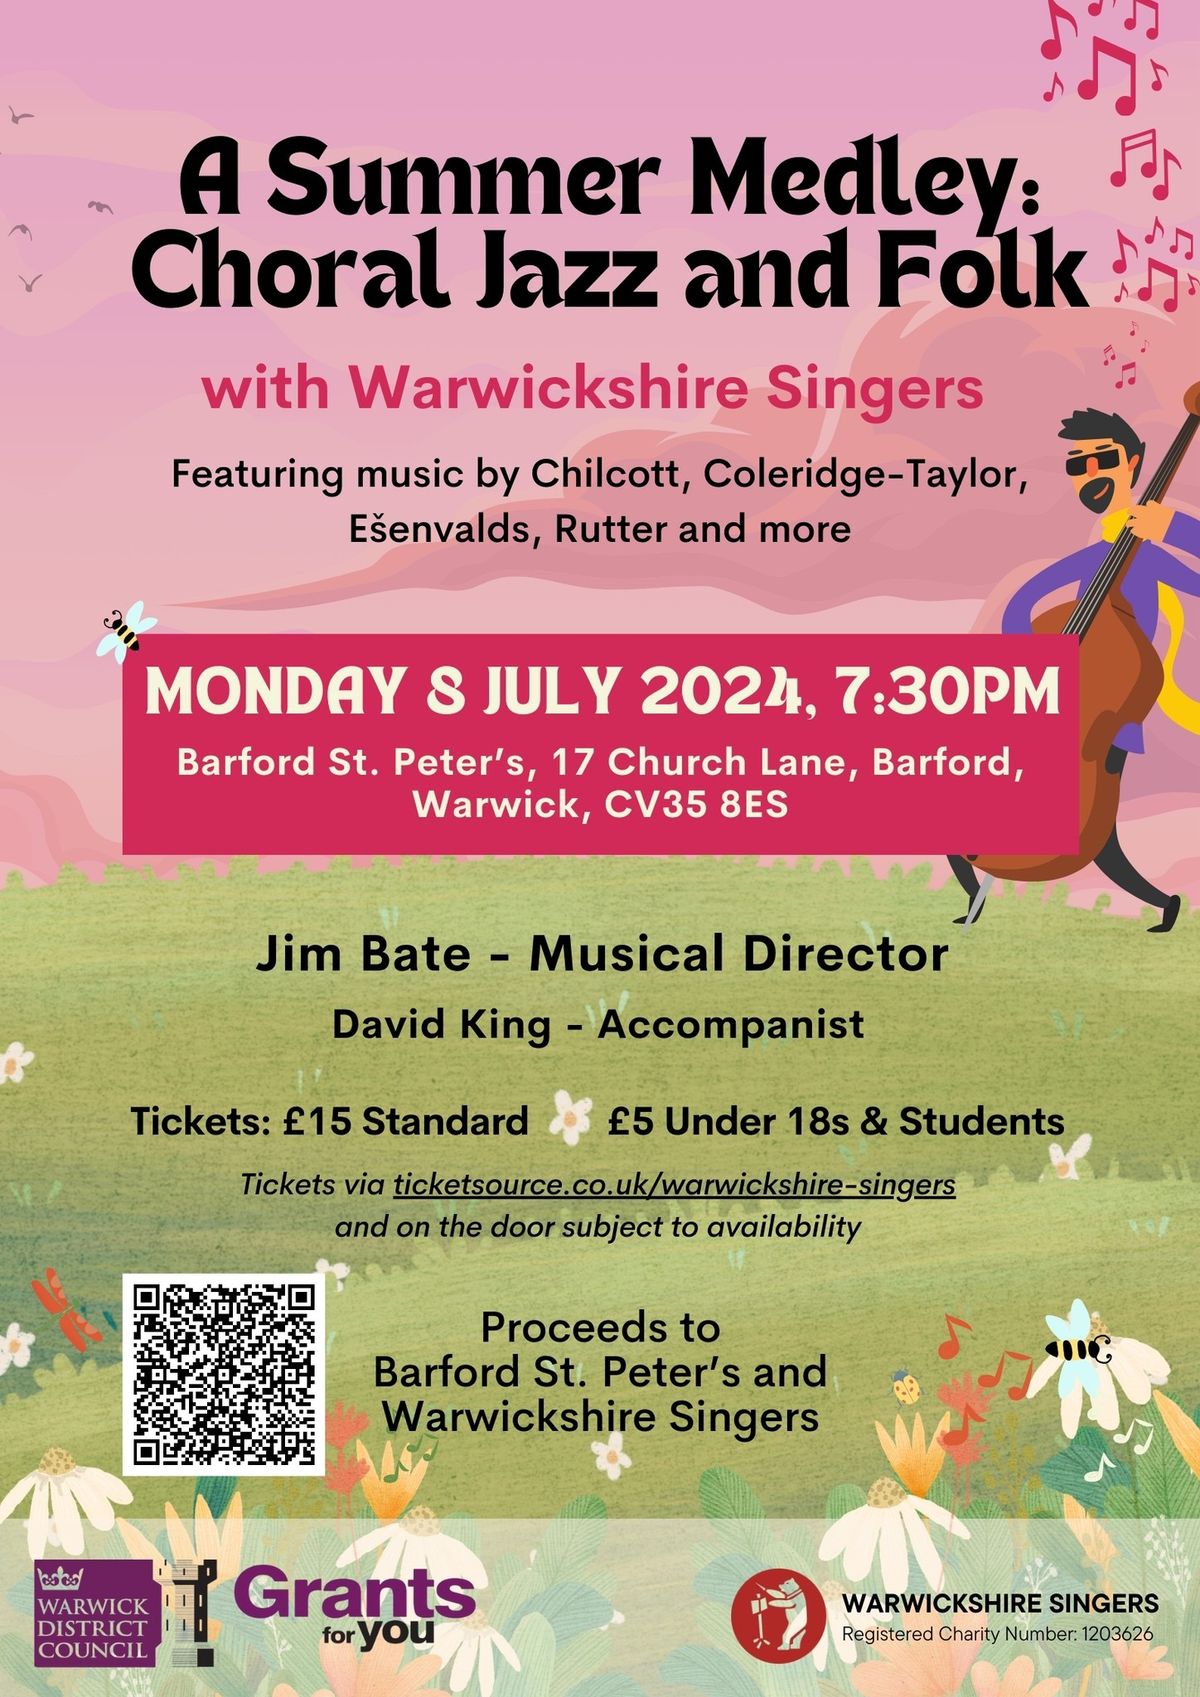 A Summer Medley: Choral Jazz and Folk with Warwickshire Singers